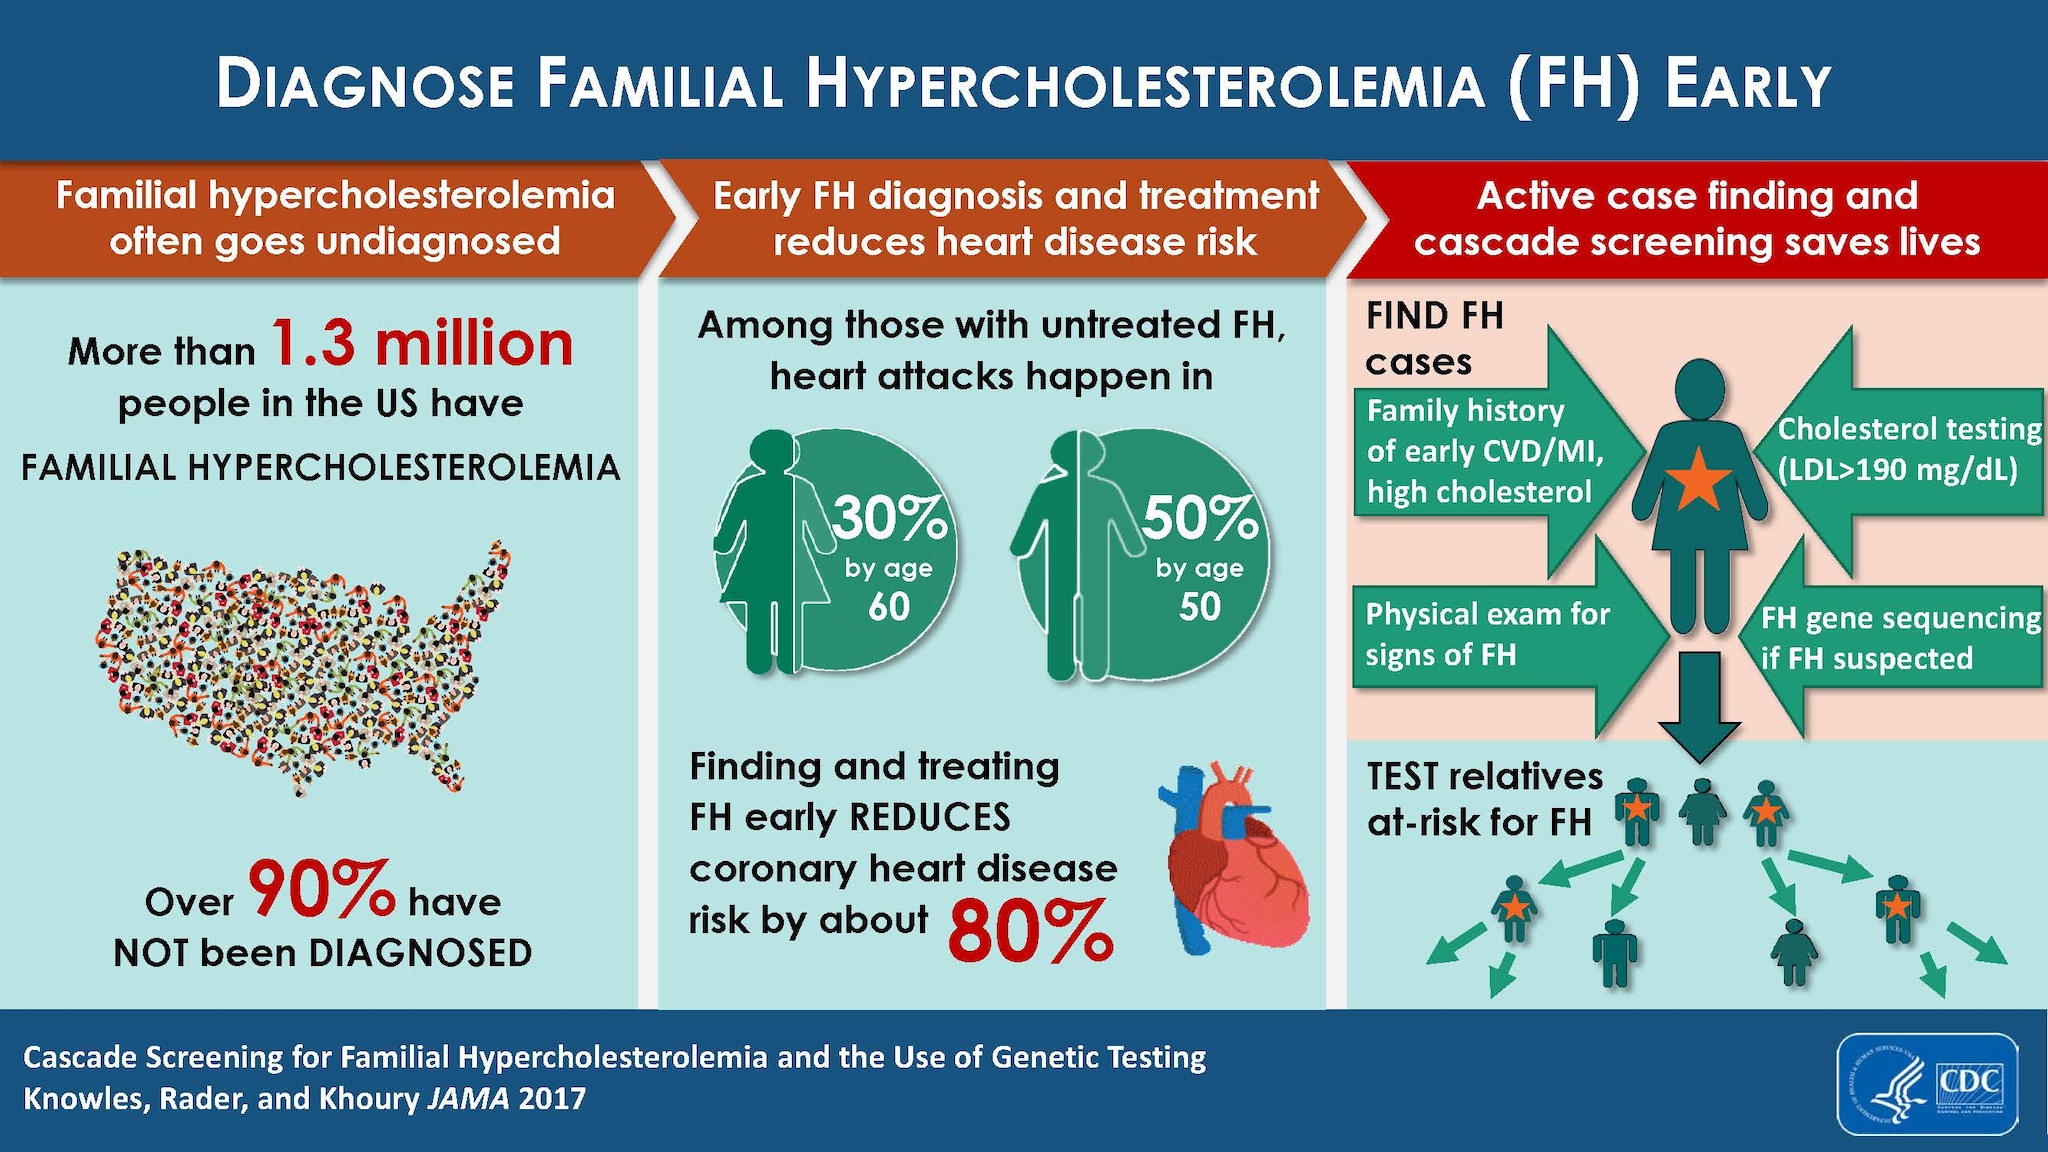 Visual Abstract for Diagnose Familial Hypercholesterolemia (FH) Early